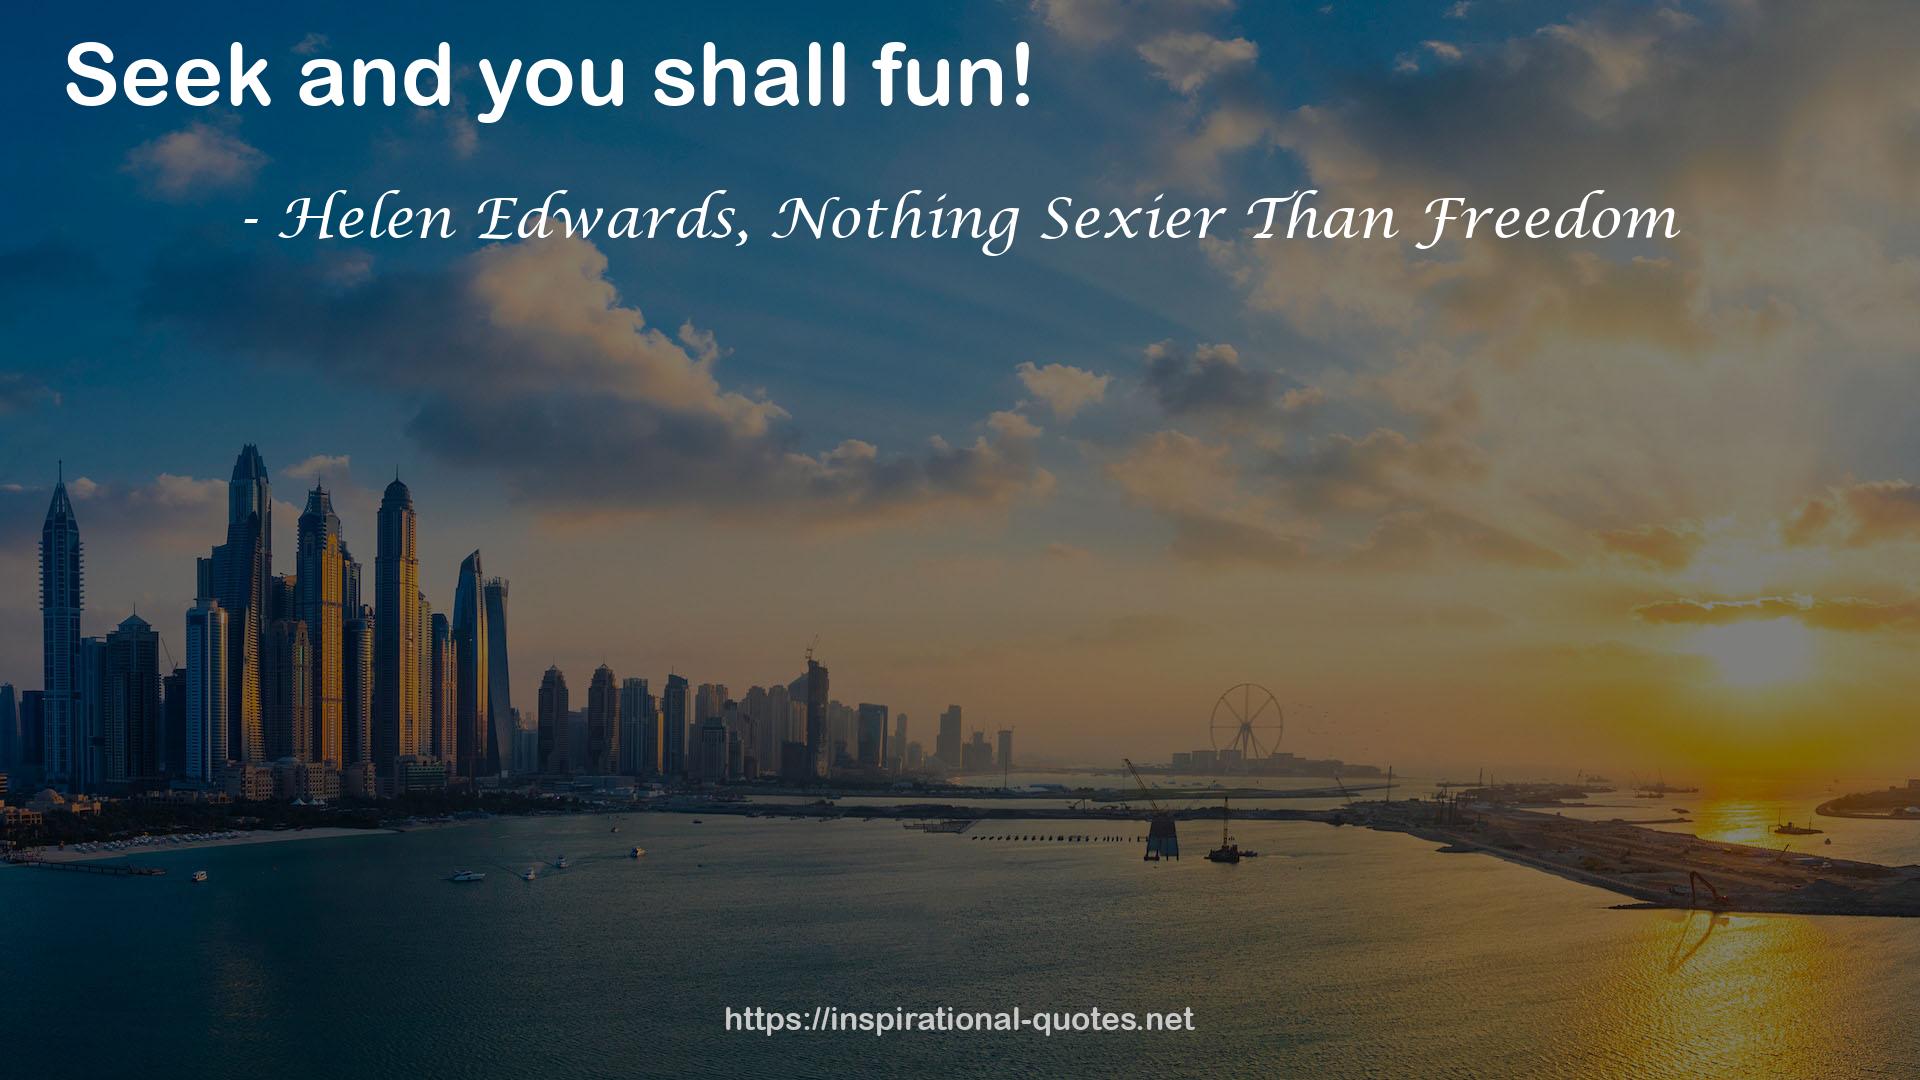 Helen Edwards, Nothing Sexier Than Freedom QUOTES